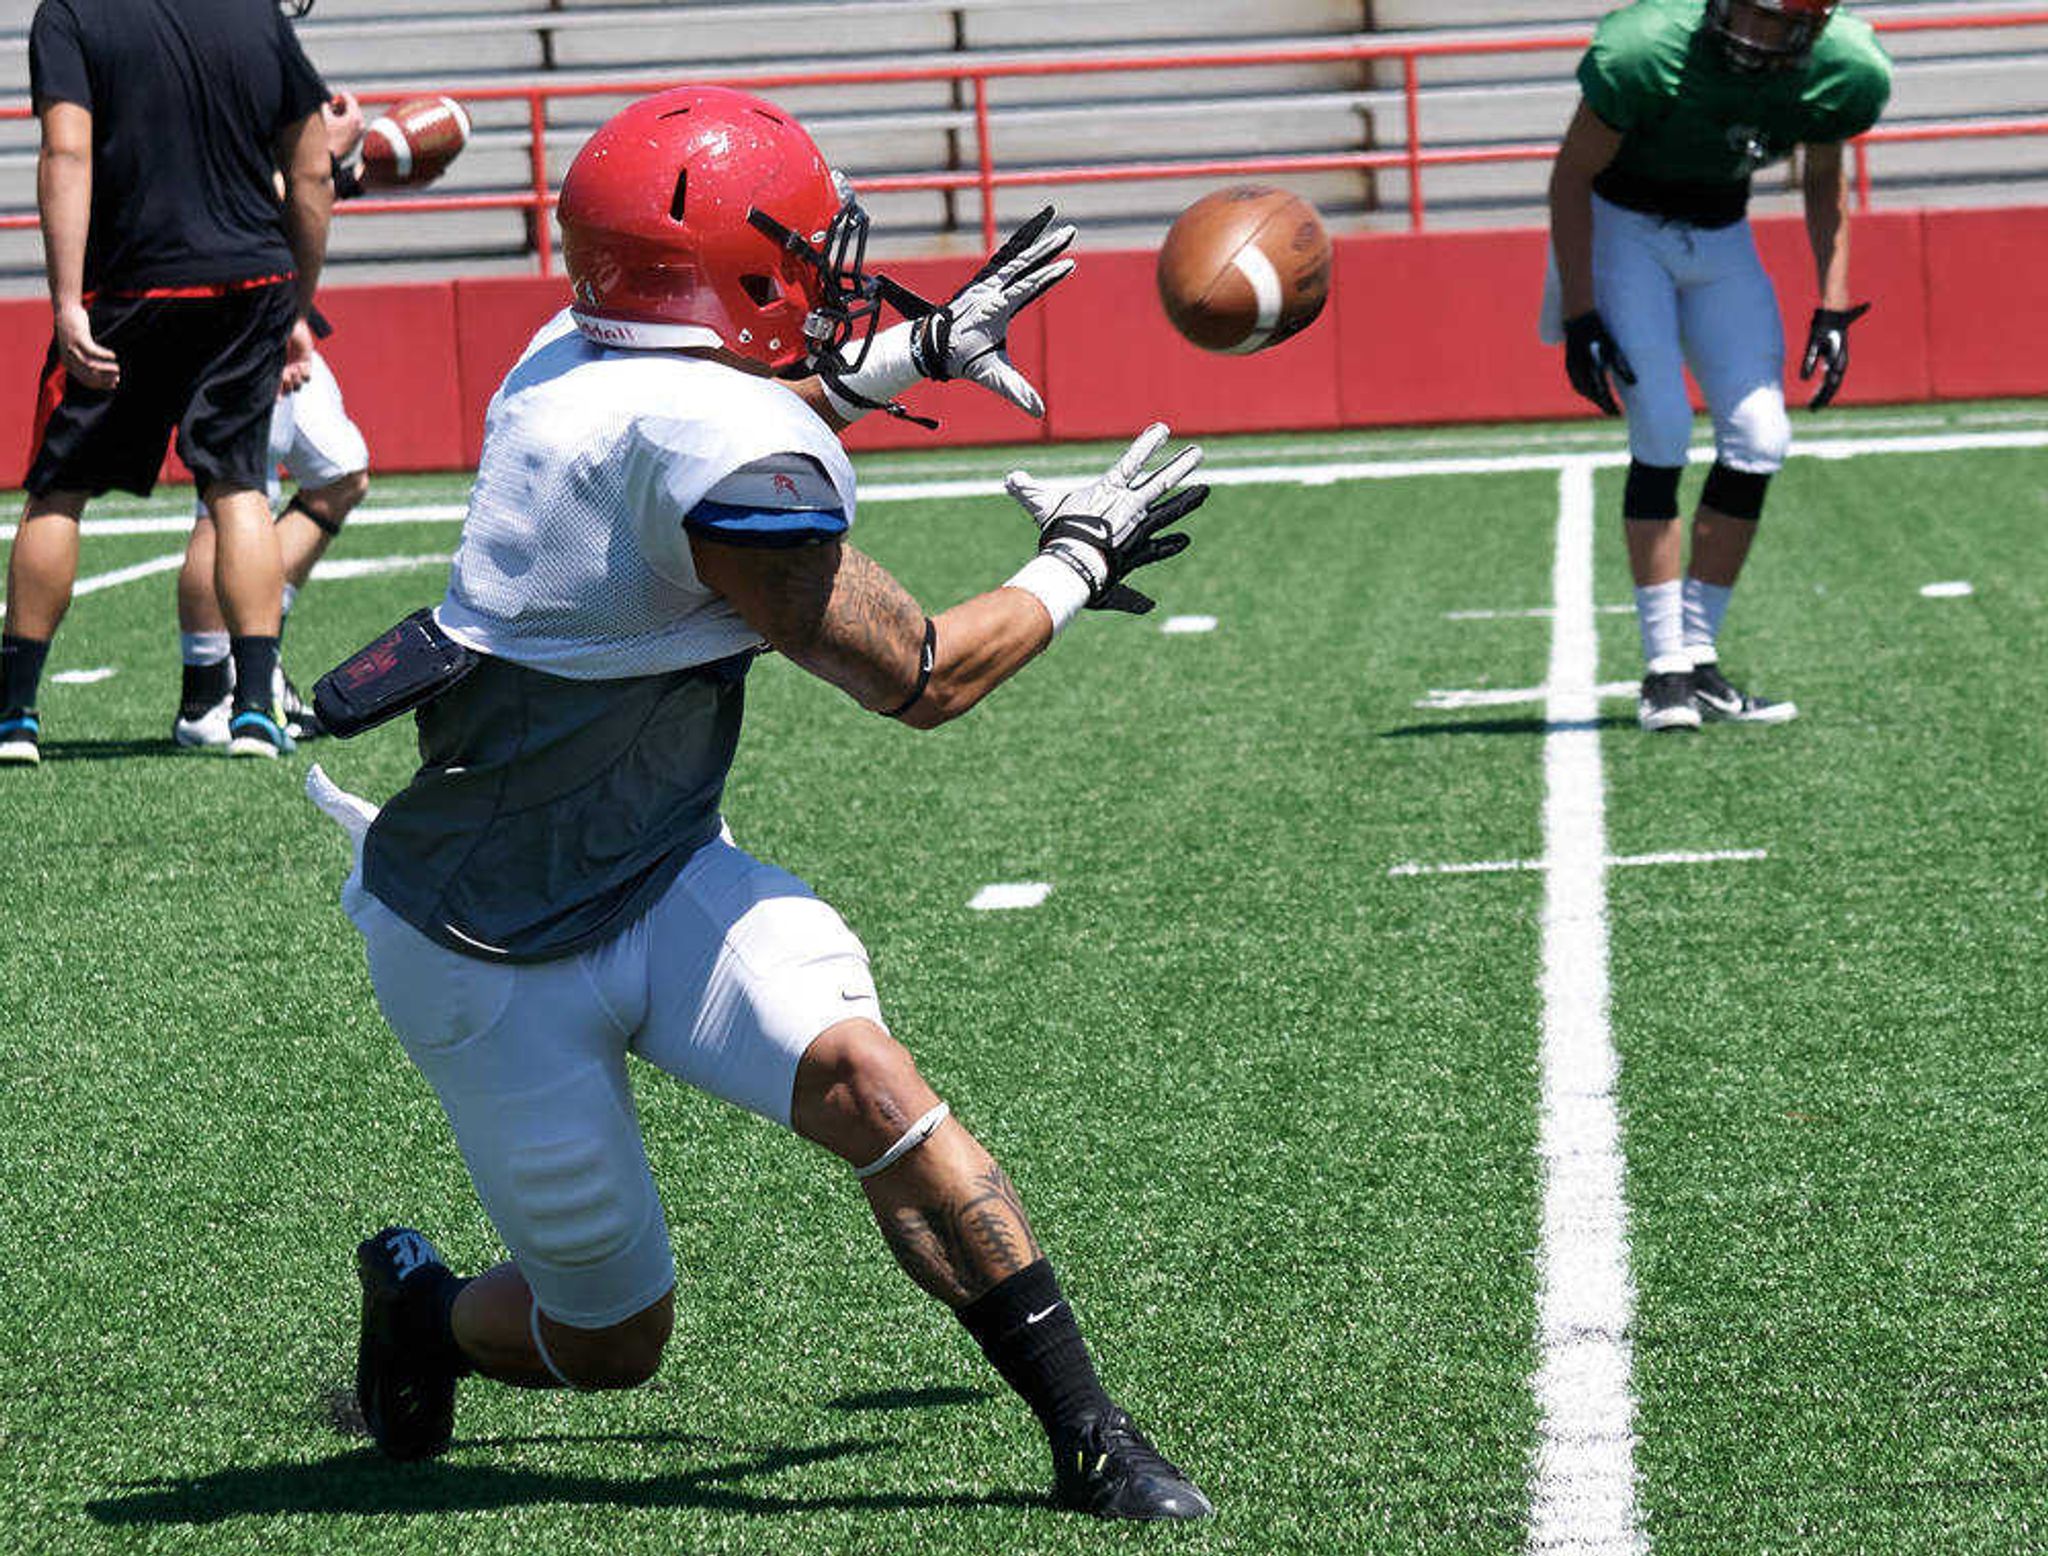 Spencer Davis receives the ball during practice on Aug. 20. Photo by Alyssa Brewer